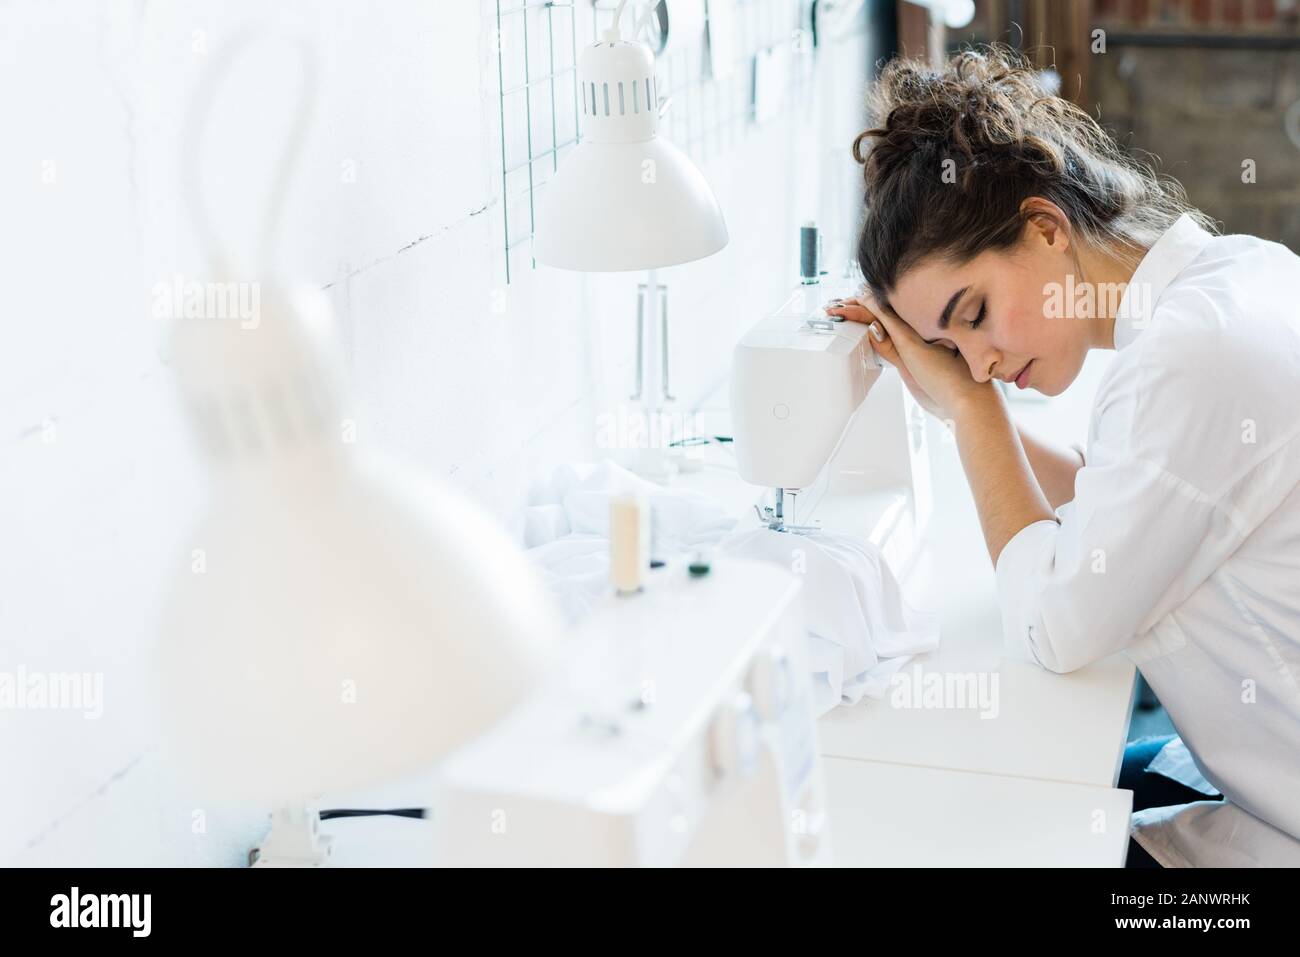 Tired seamstress at workplace Stock Photo